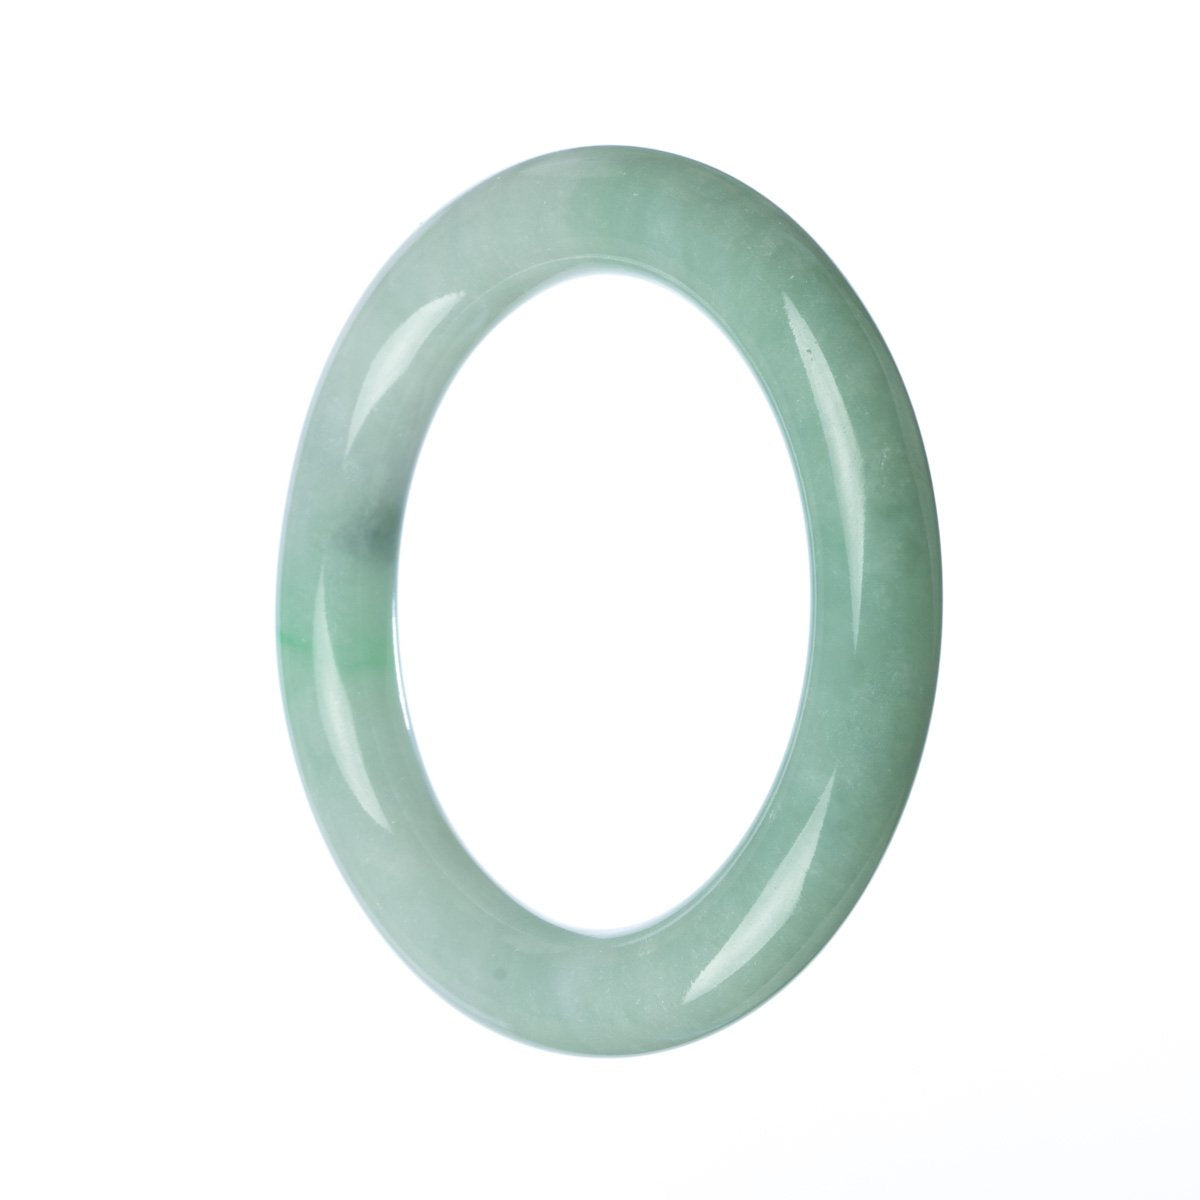 A round, genuine natural green jadeite jade bangle bracelet with a diameter of 58mm, crafted by MAYS GEMS.